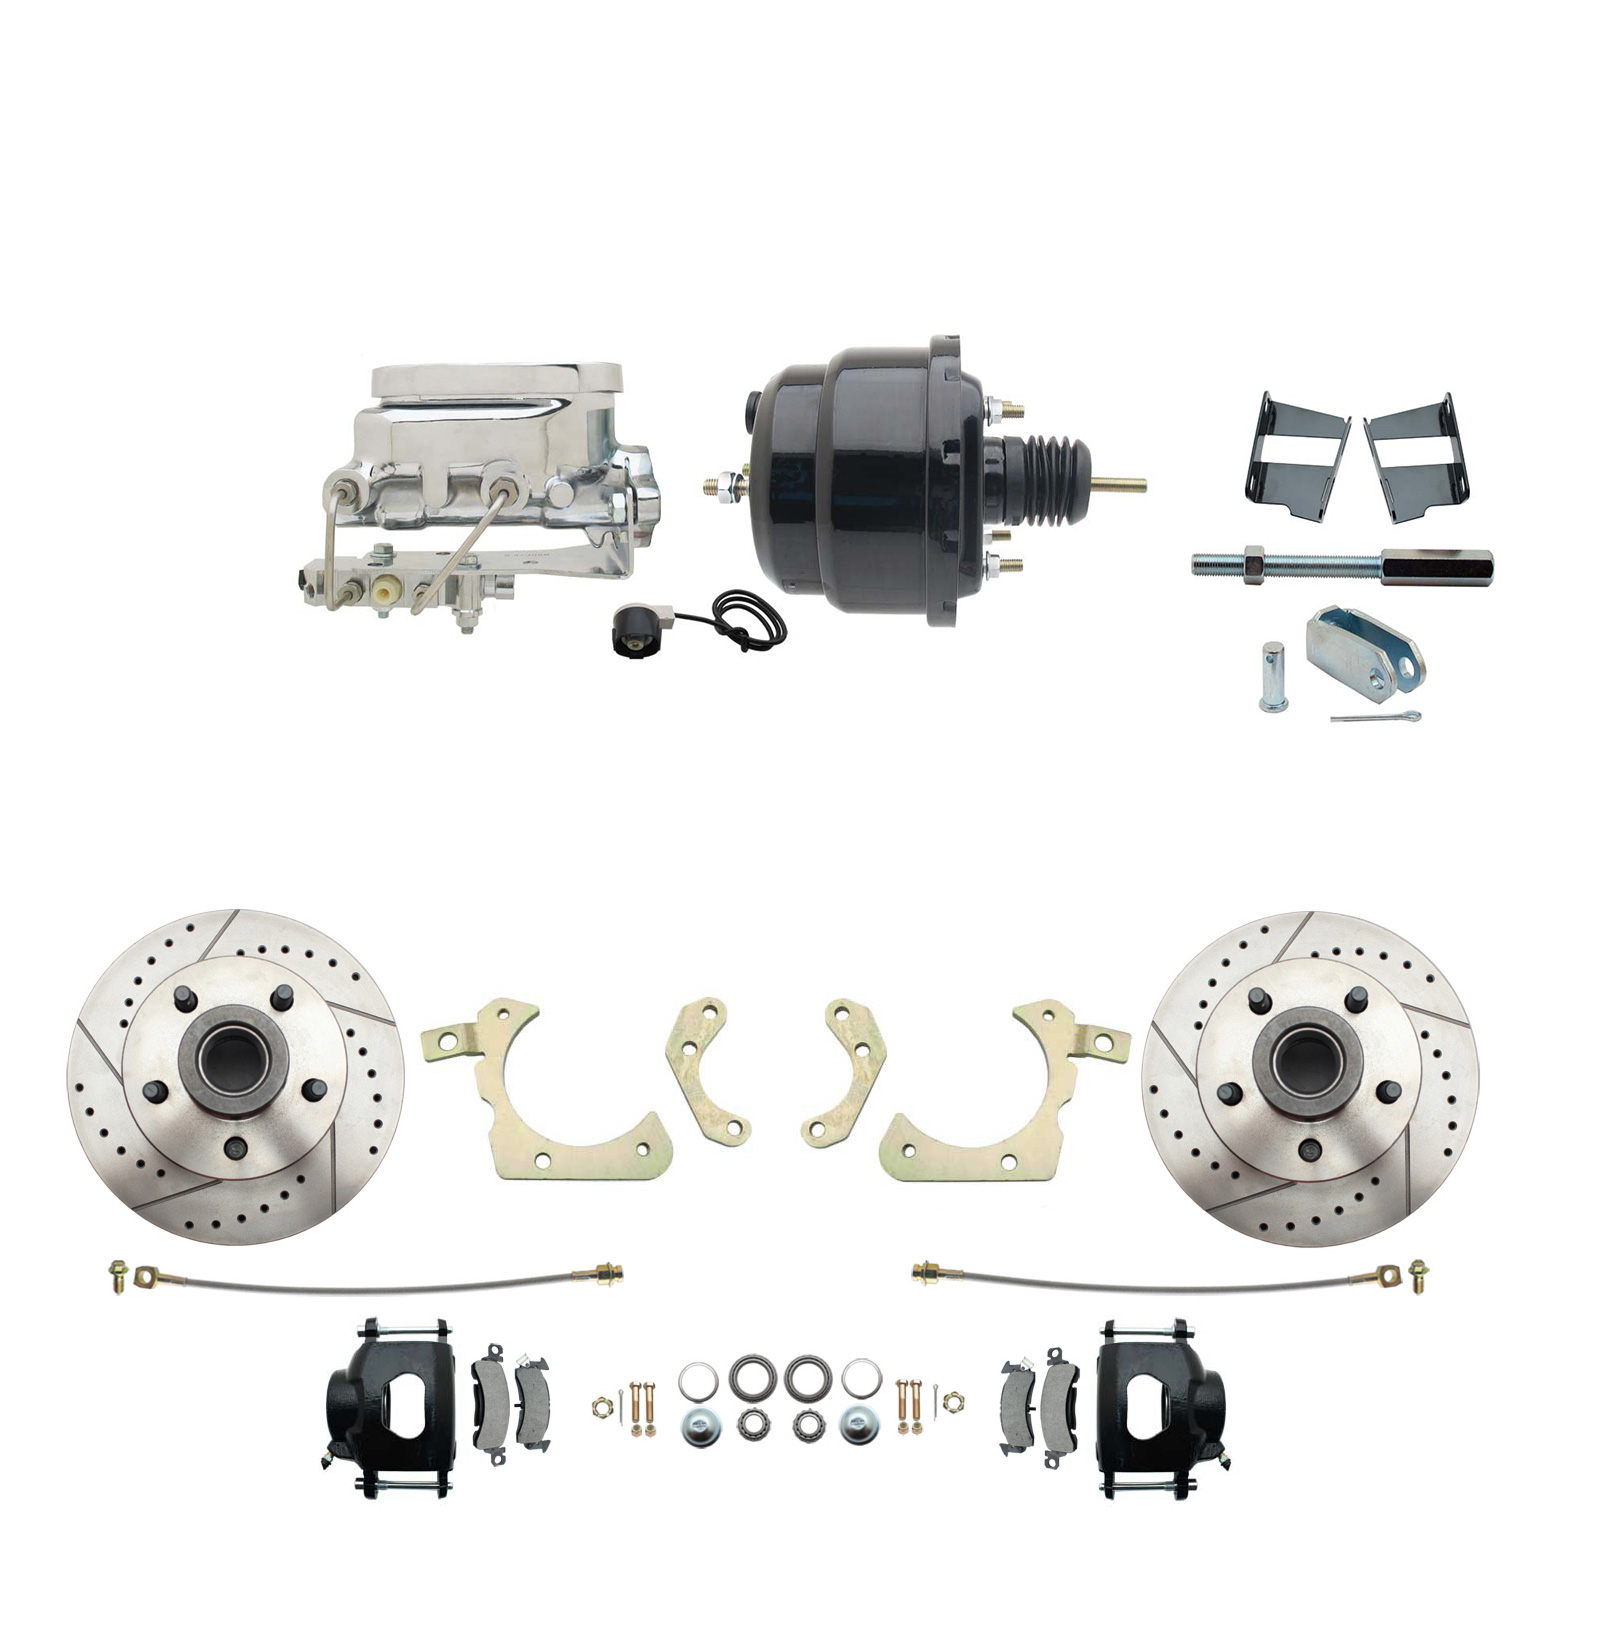 1959-1964 GM Full Size Front Disc Brake Kit Black Powder Coated Calipers Drilled/Slotted Rotors (Impala, Bel Air, Biscayne) & 8 Dual Powder Coated Black Booster Conversion Kit W/ Chrome Flat Top Master Cylinder Bottom Mount D